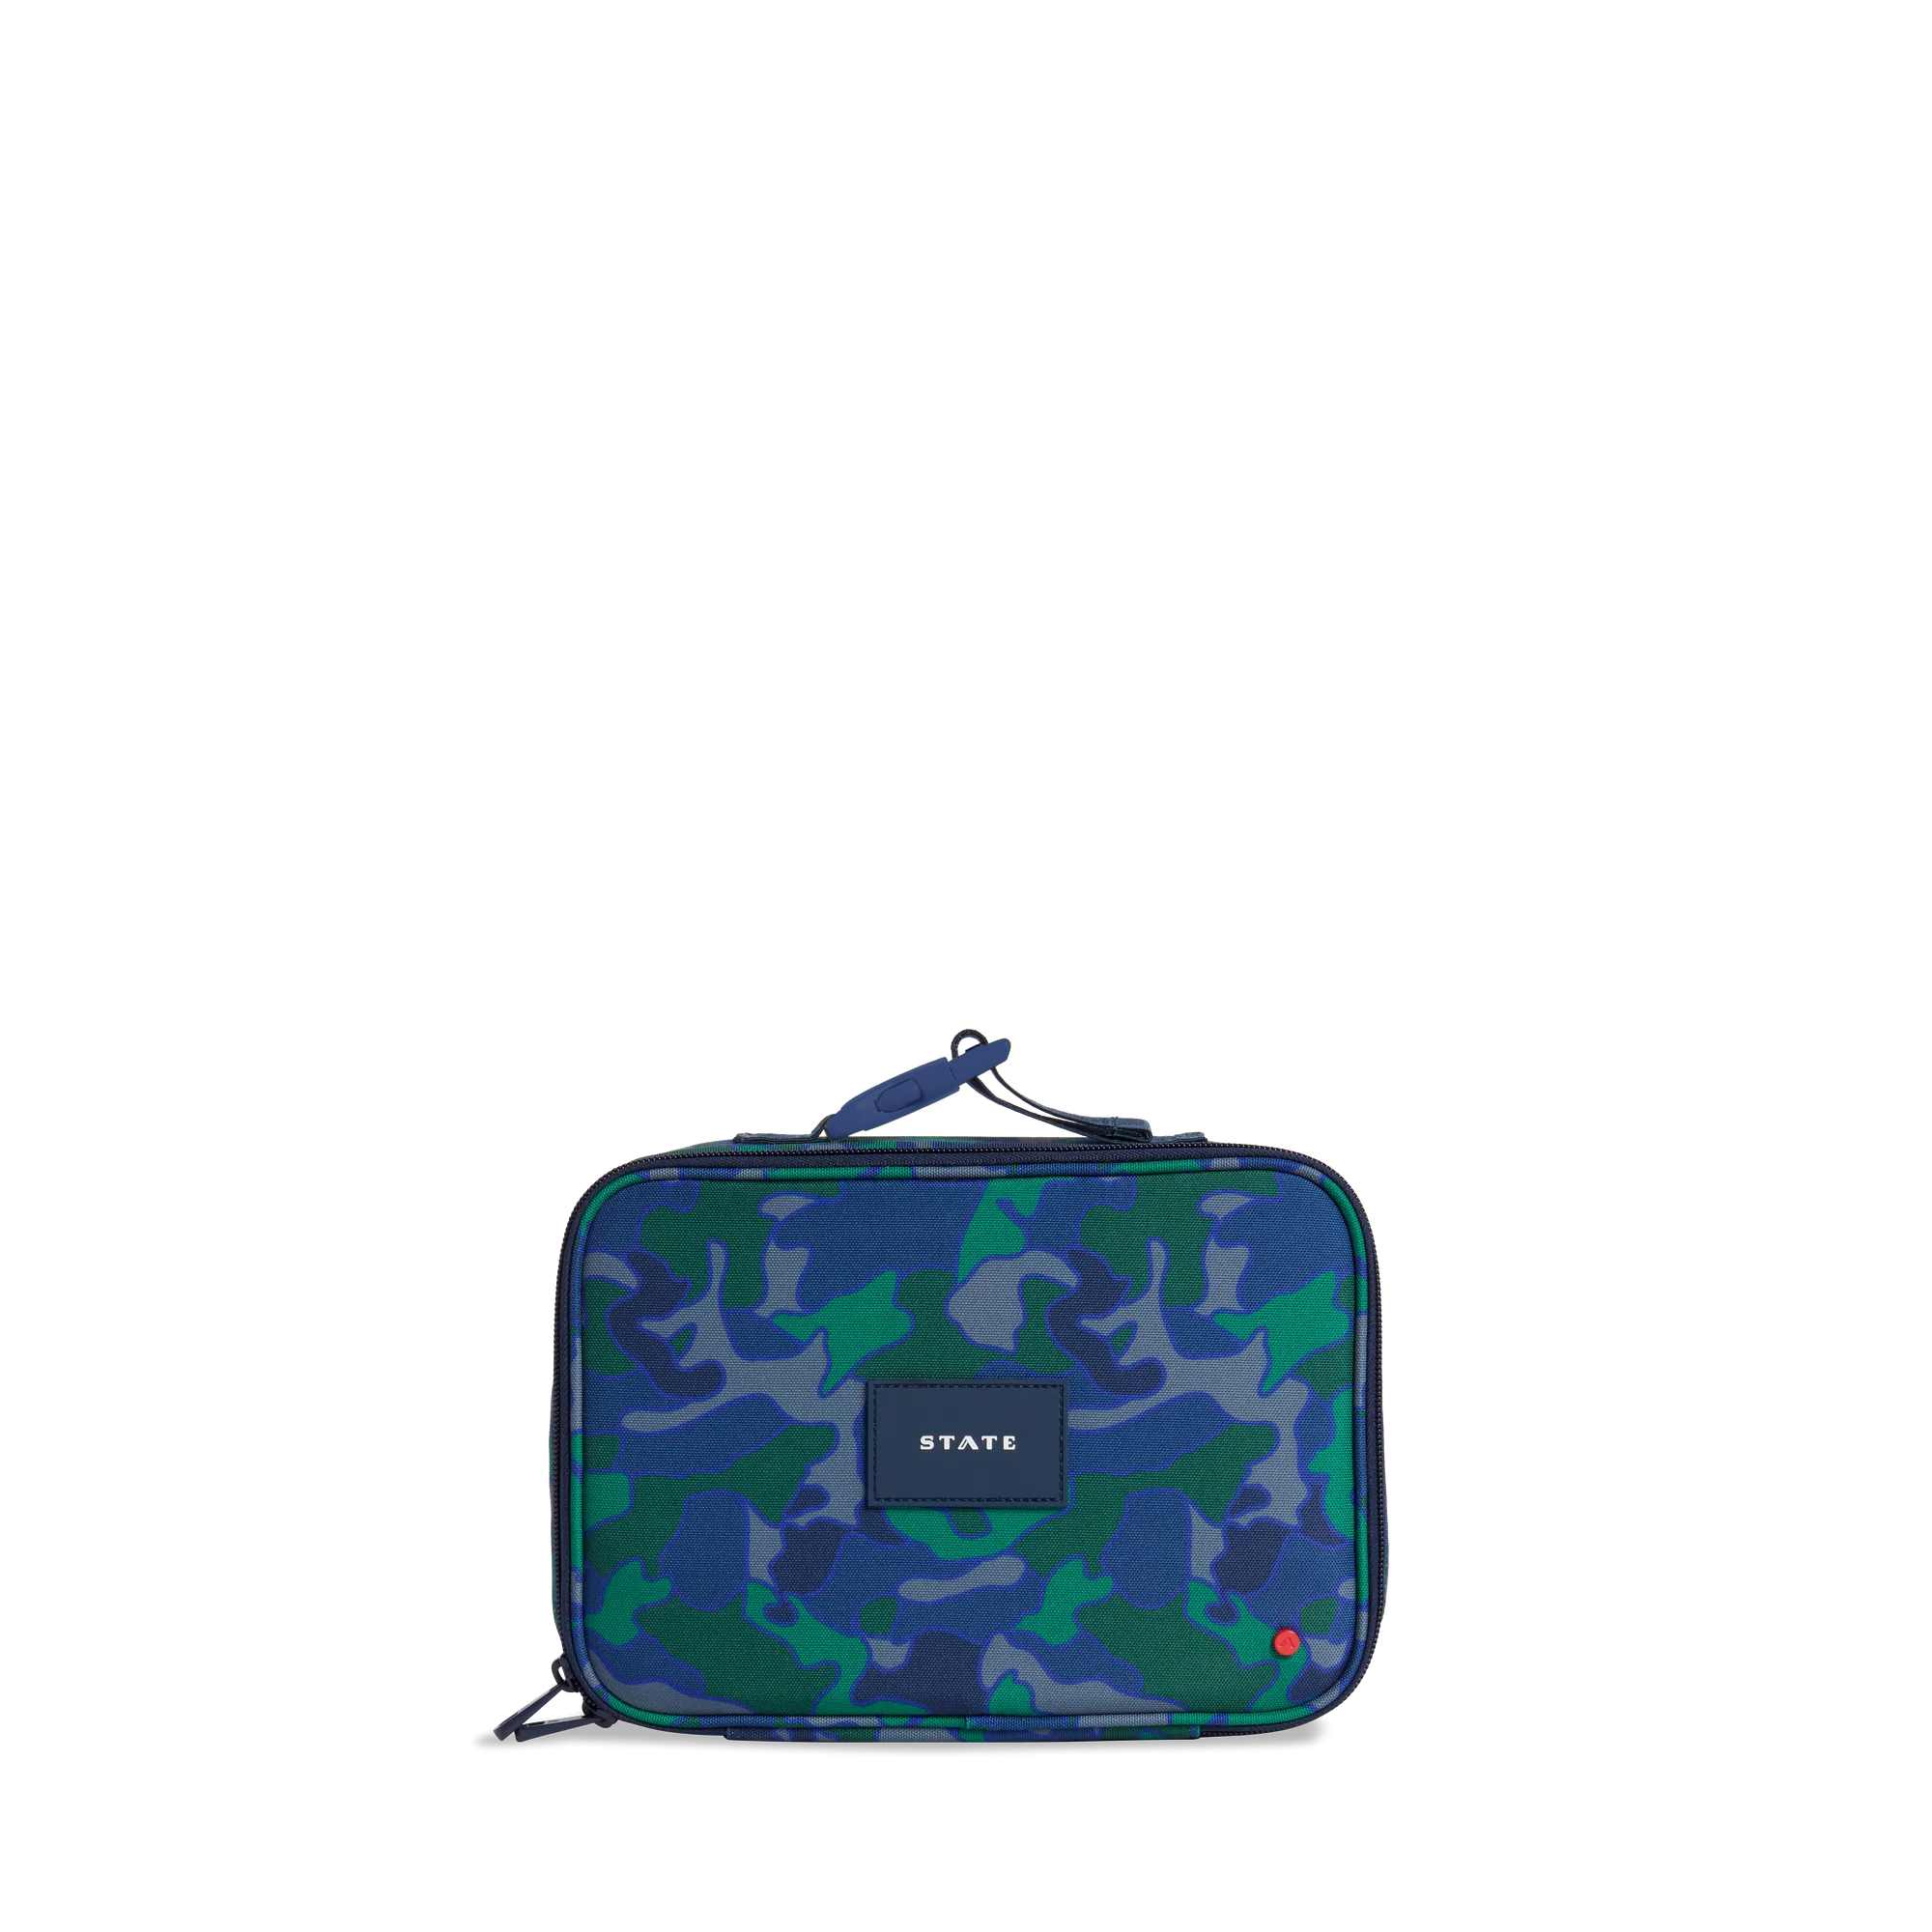 Embroidered Camo Lunchbox & Backpack. Boys Camouflage Monogram 